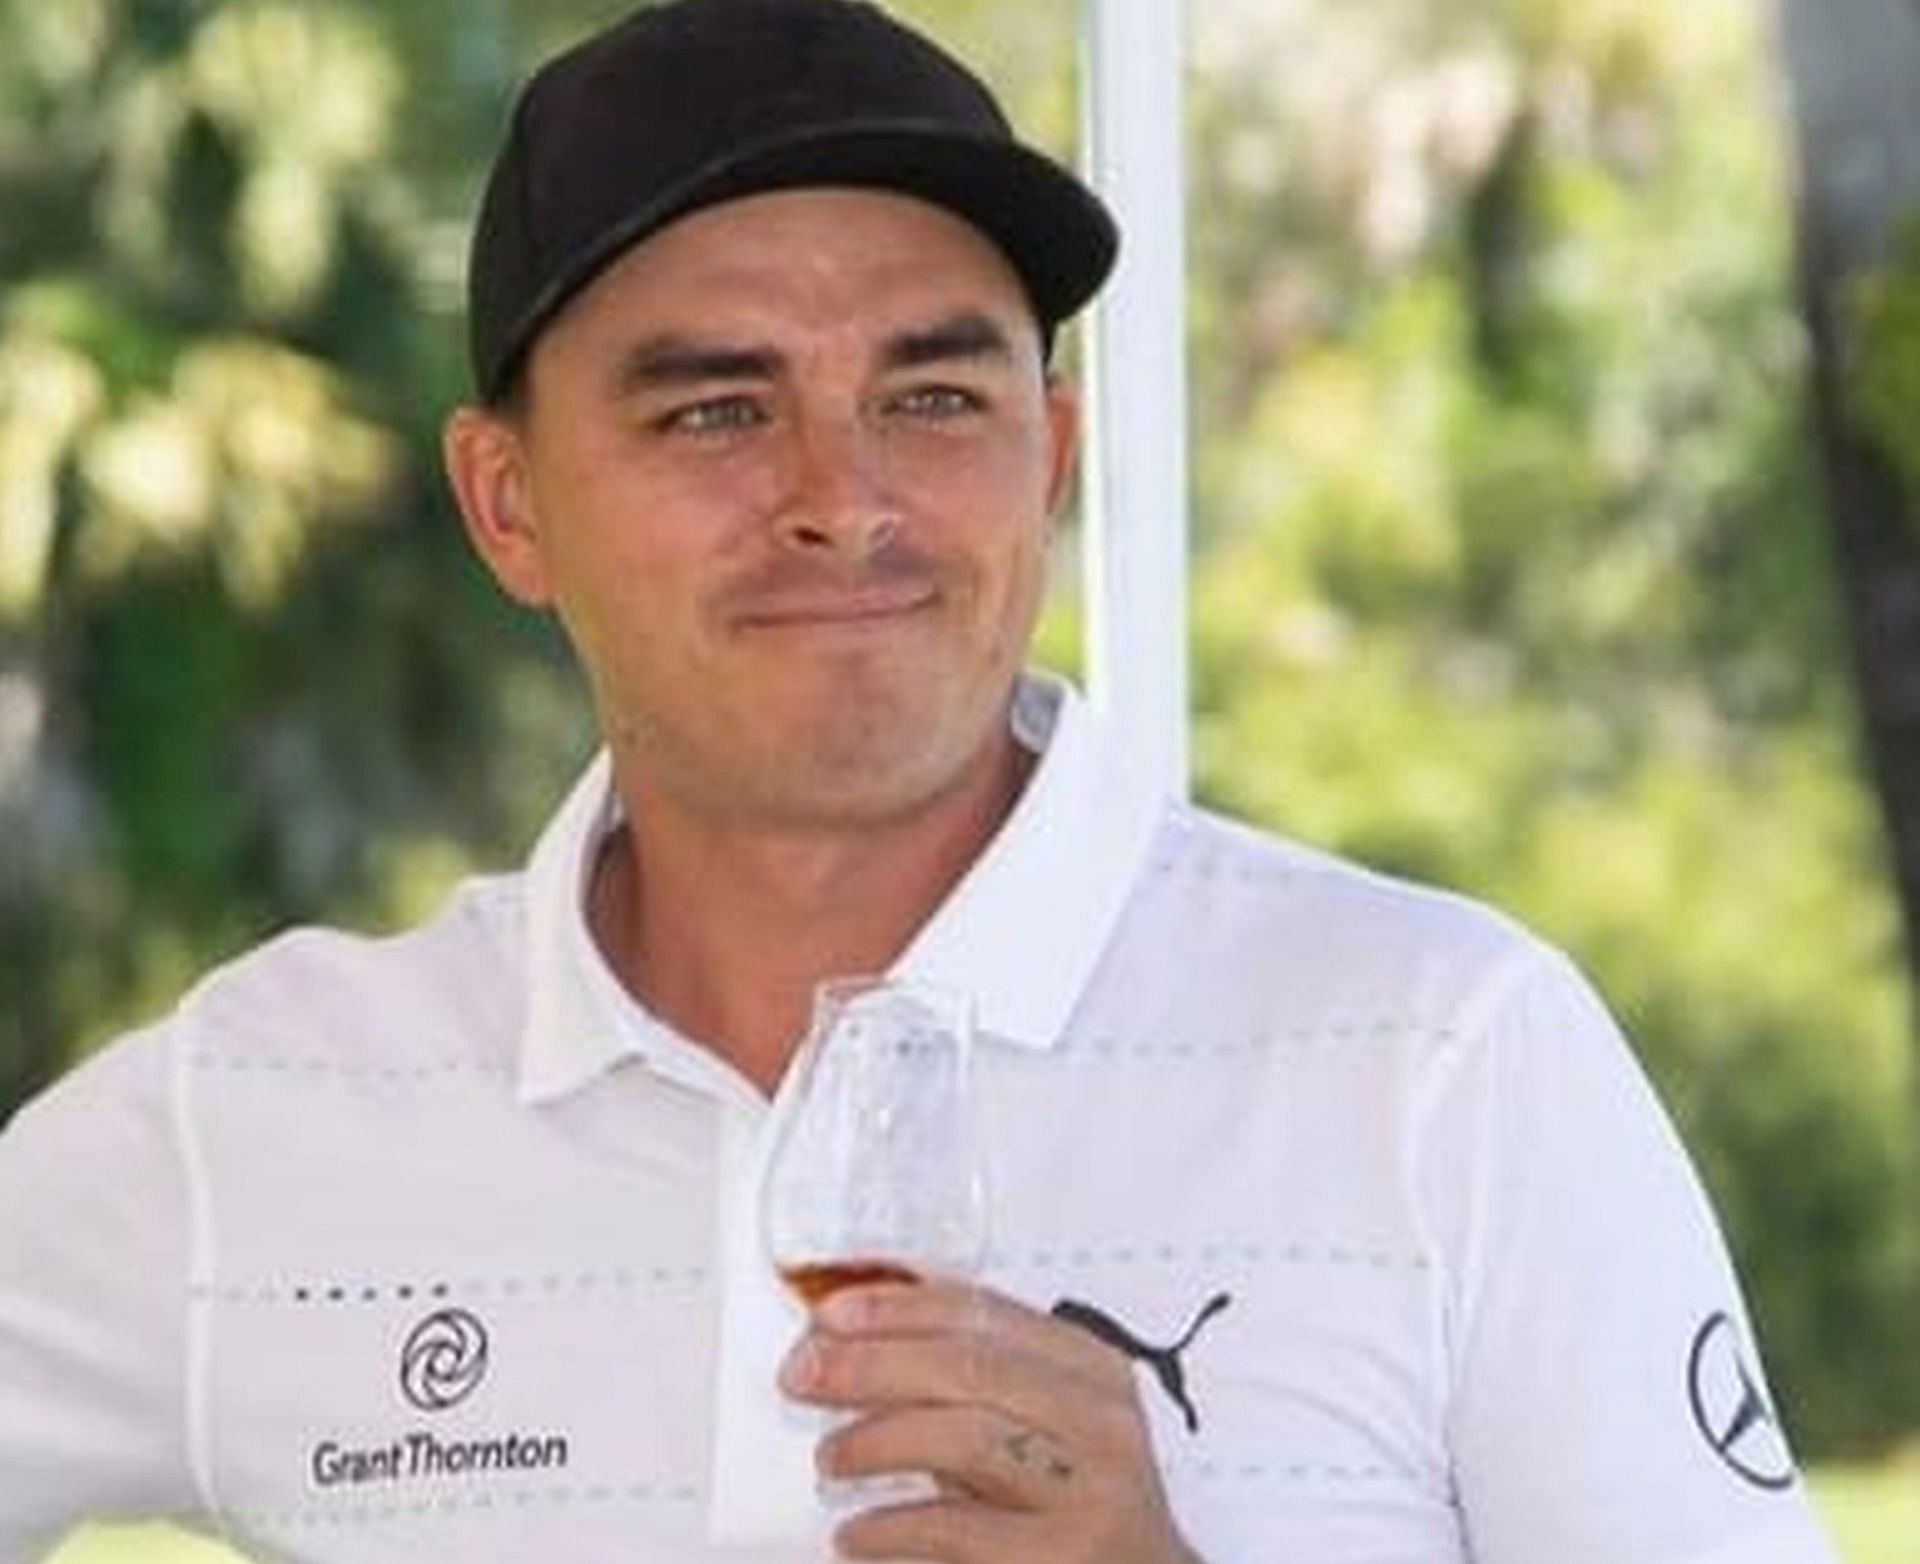 Rickie Fowlers tattoos reveal much about the man behind the golfer